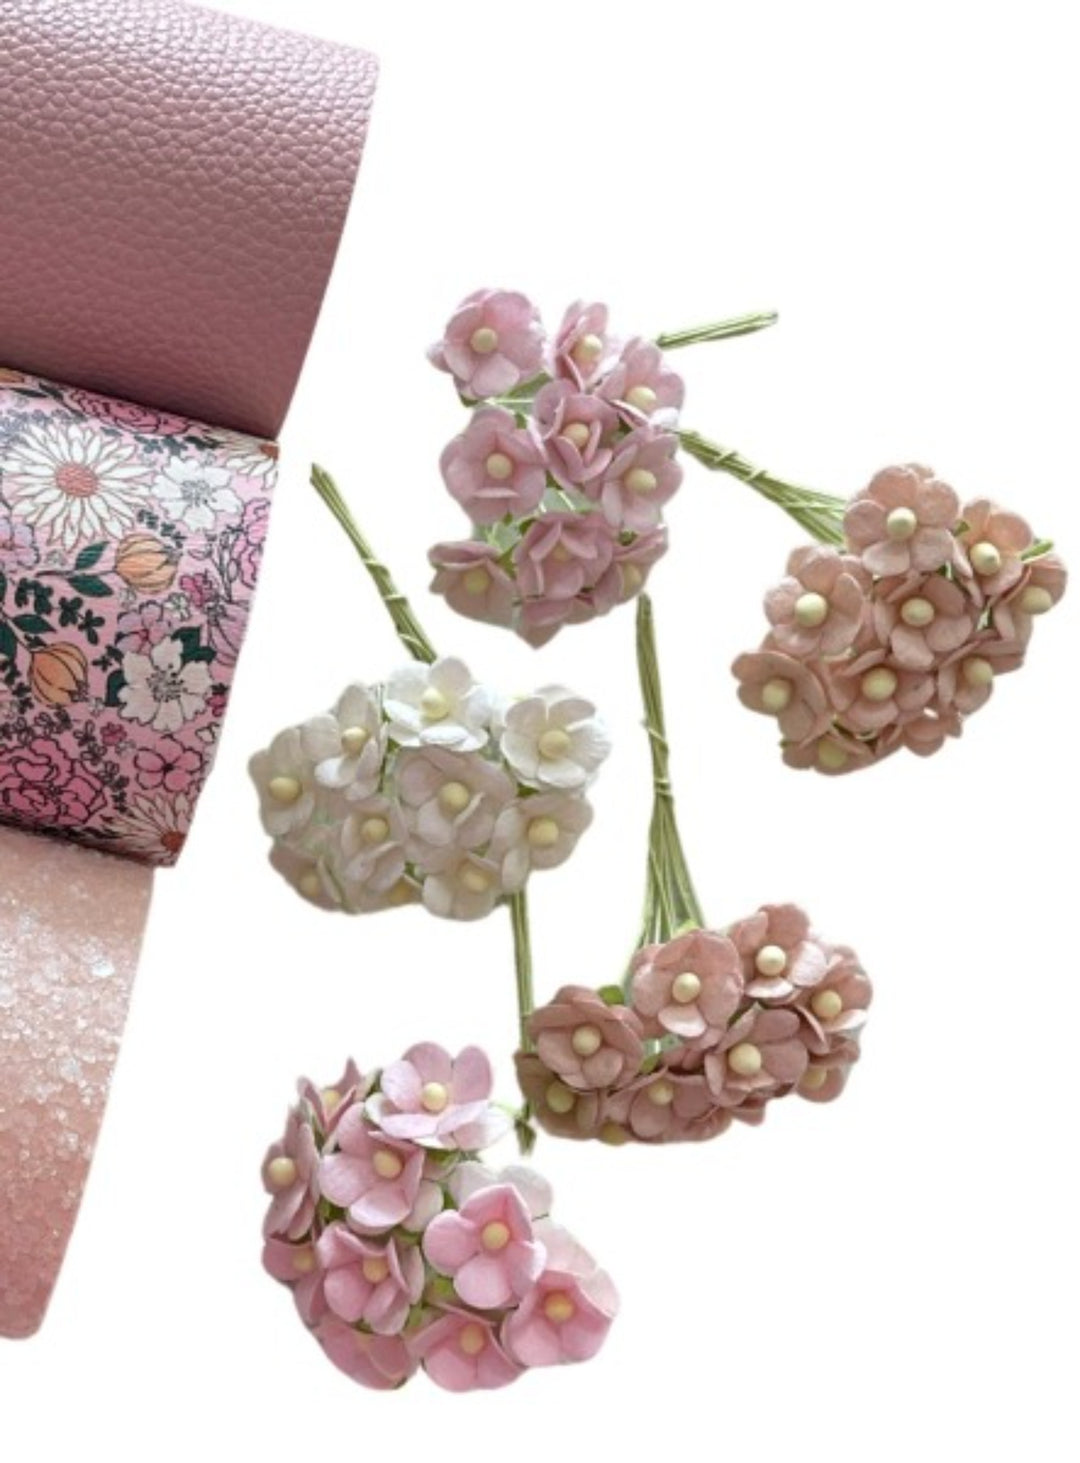 Spring Pink Boho 15mm Sweetheart Blossoms Mulberry Paper Flowers - Mixed Pantone Shades